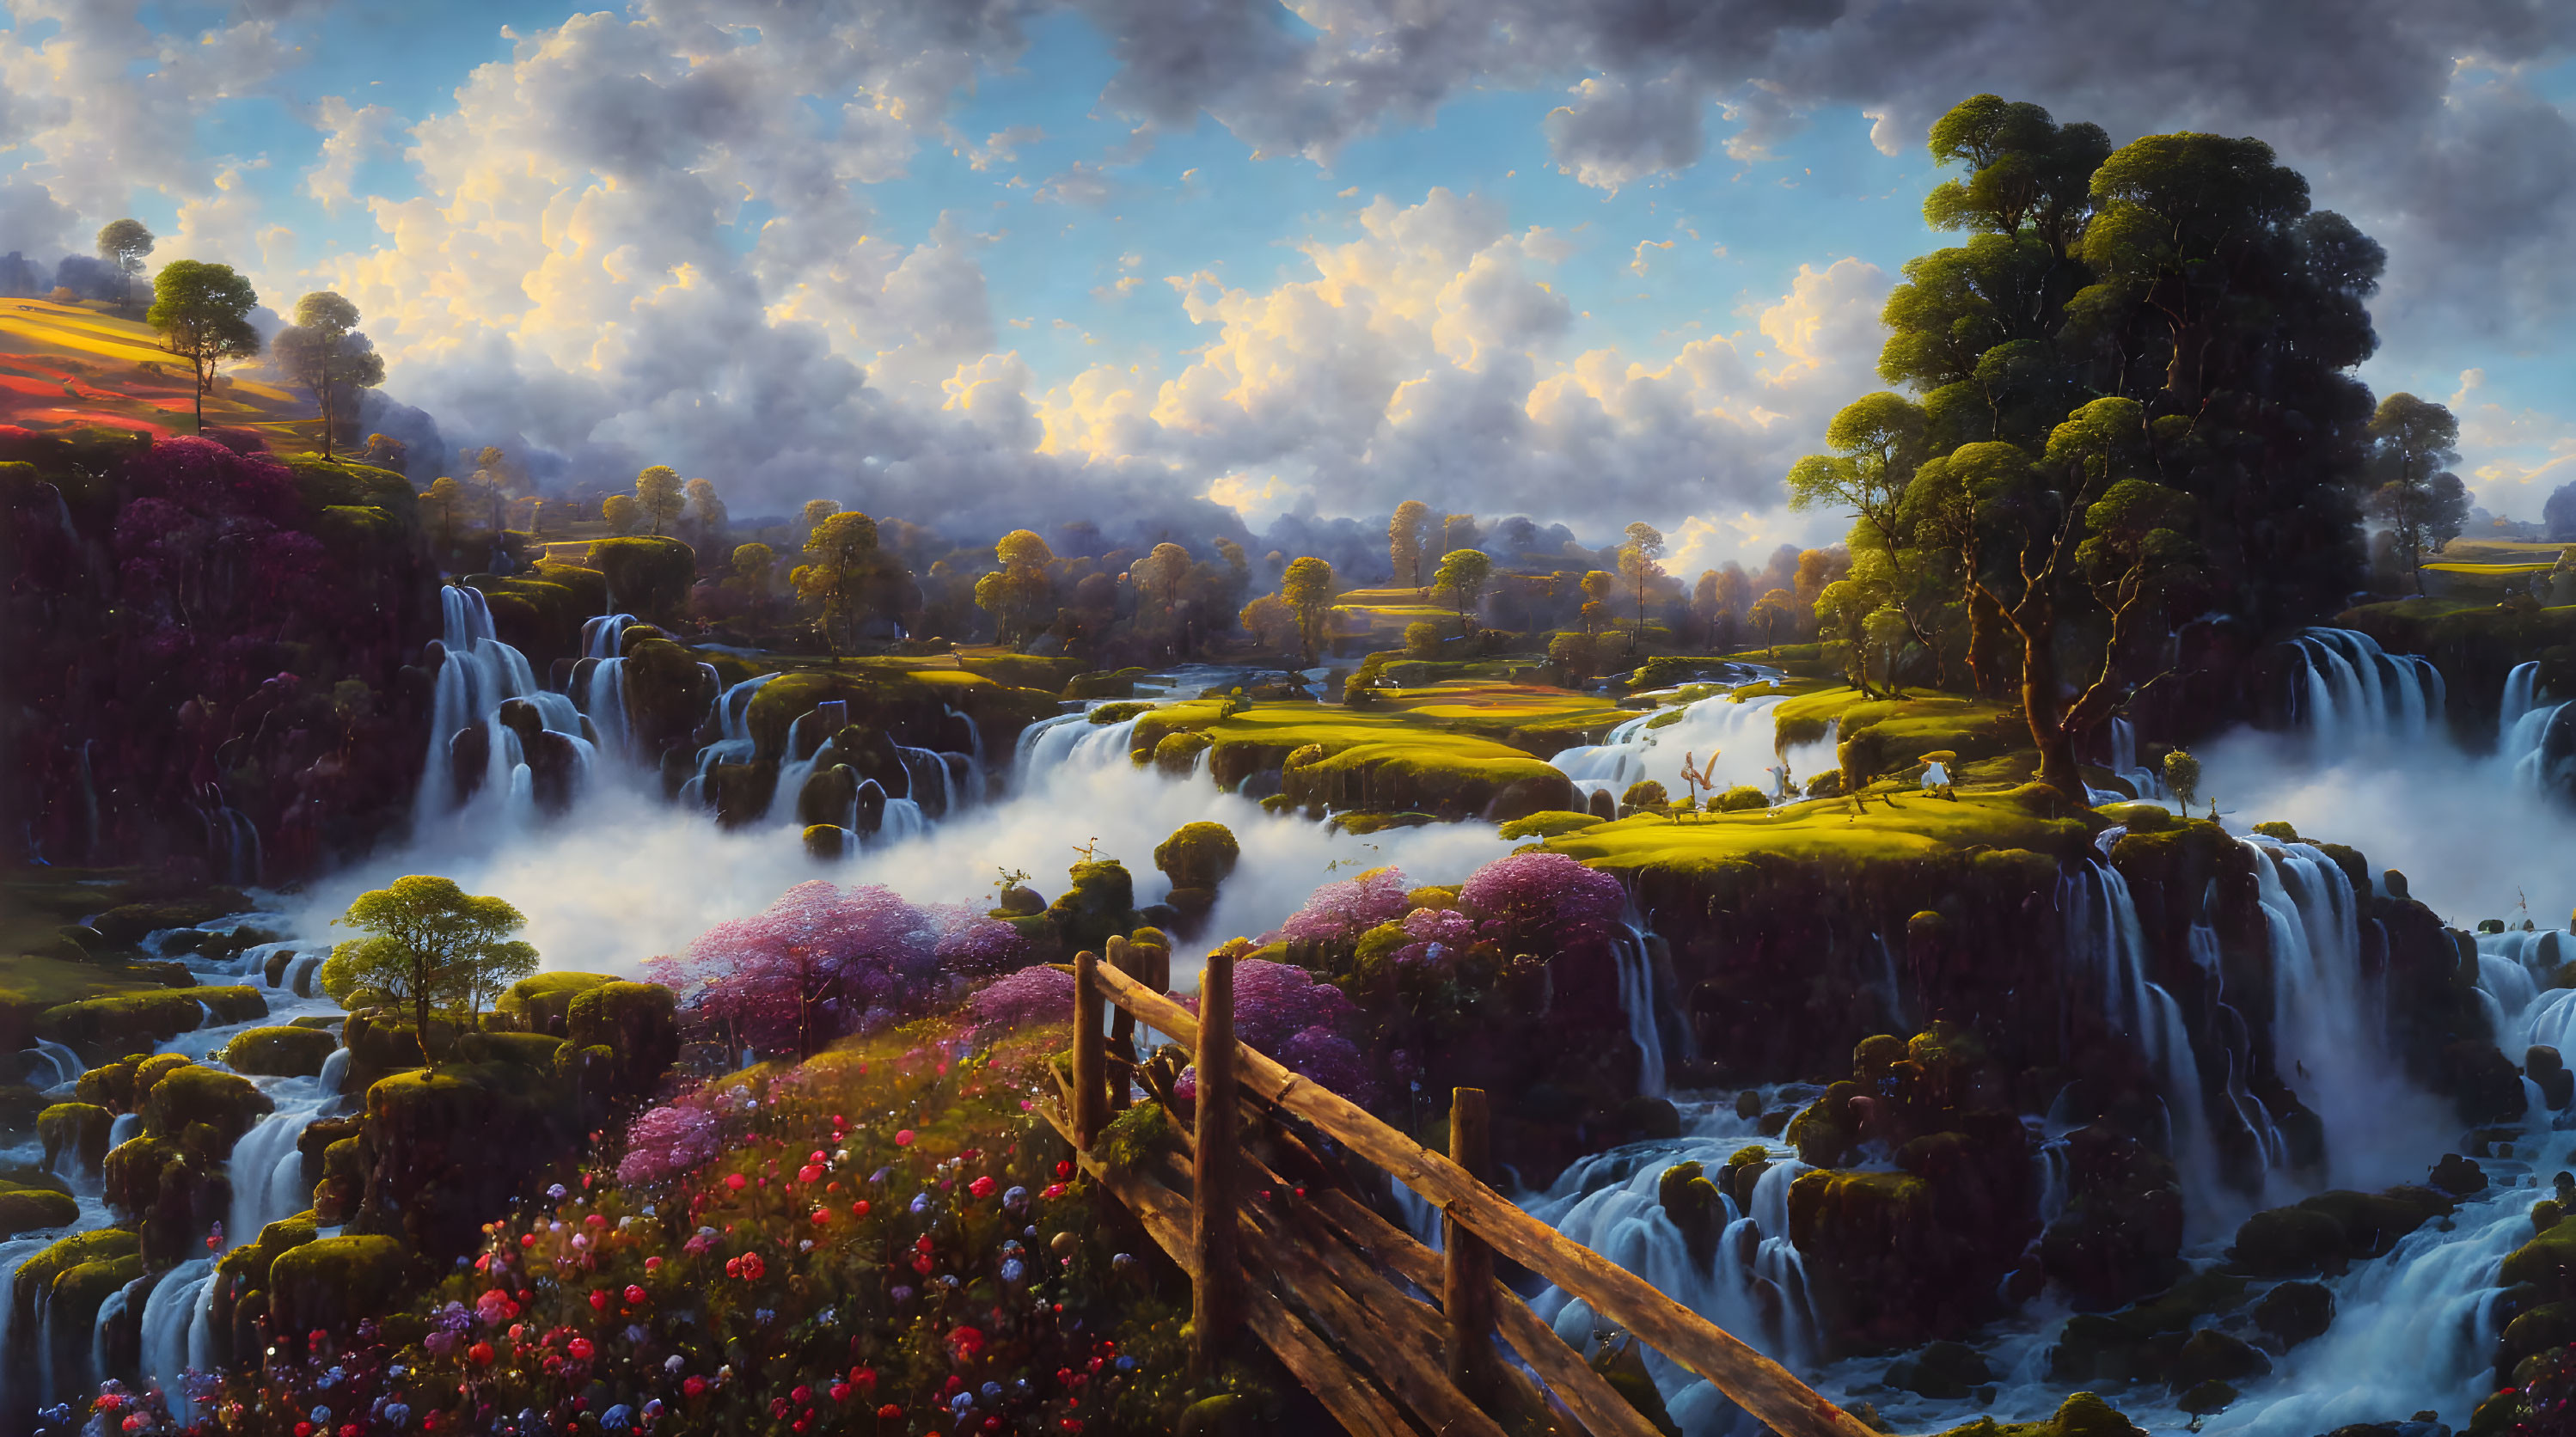 Scenic landscape with waterfalls, greenery, flowers, and dramatic sky